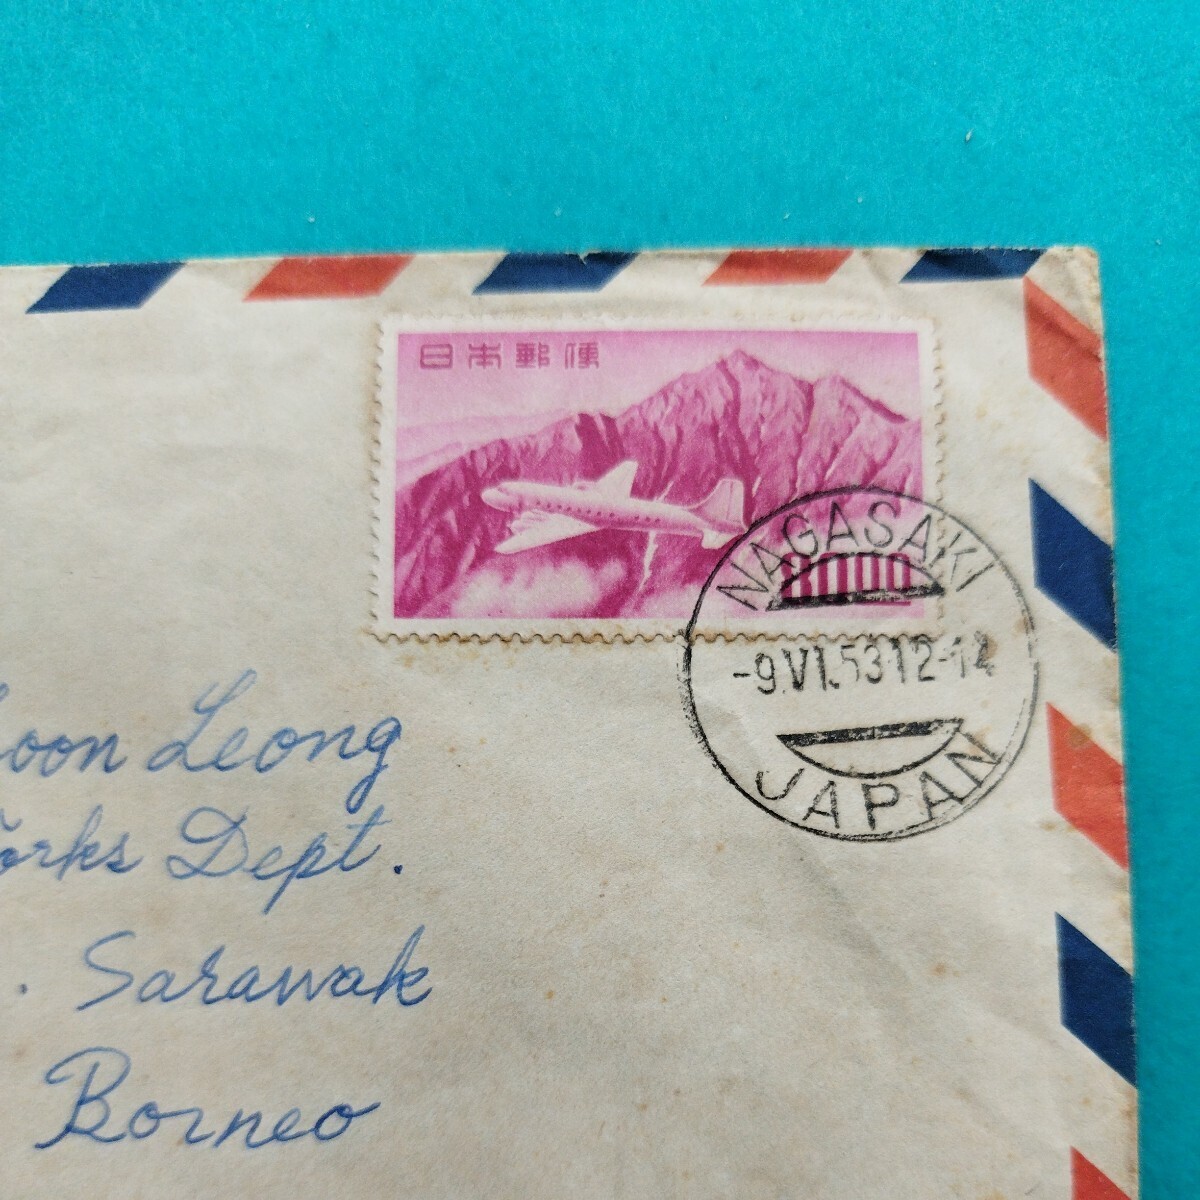 * England .bo Rene o addressed to * aviation mail bo Rene o island Sara wak.k chin addressed to sen unit Tateyama aviation 80 jpy pasting real . flight entire 1953 year contents not equipped 